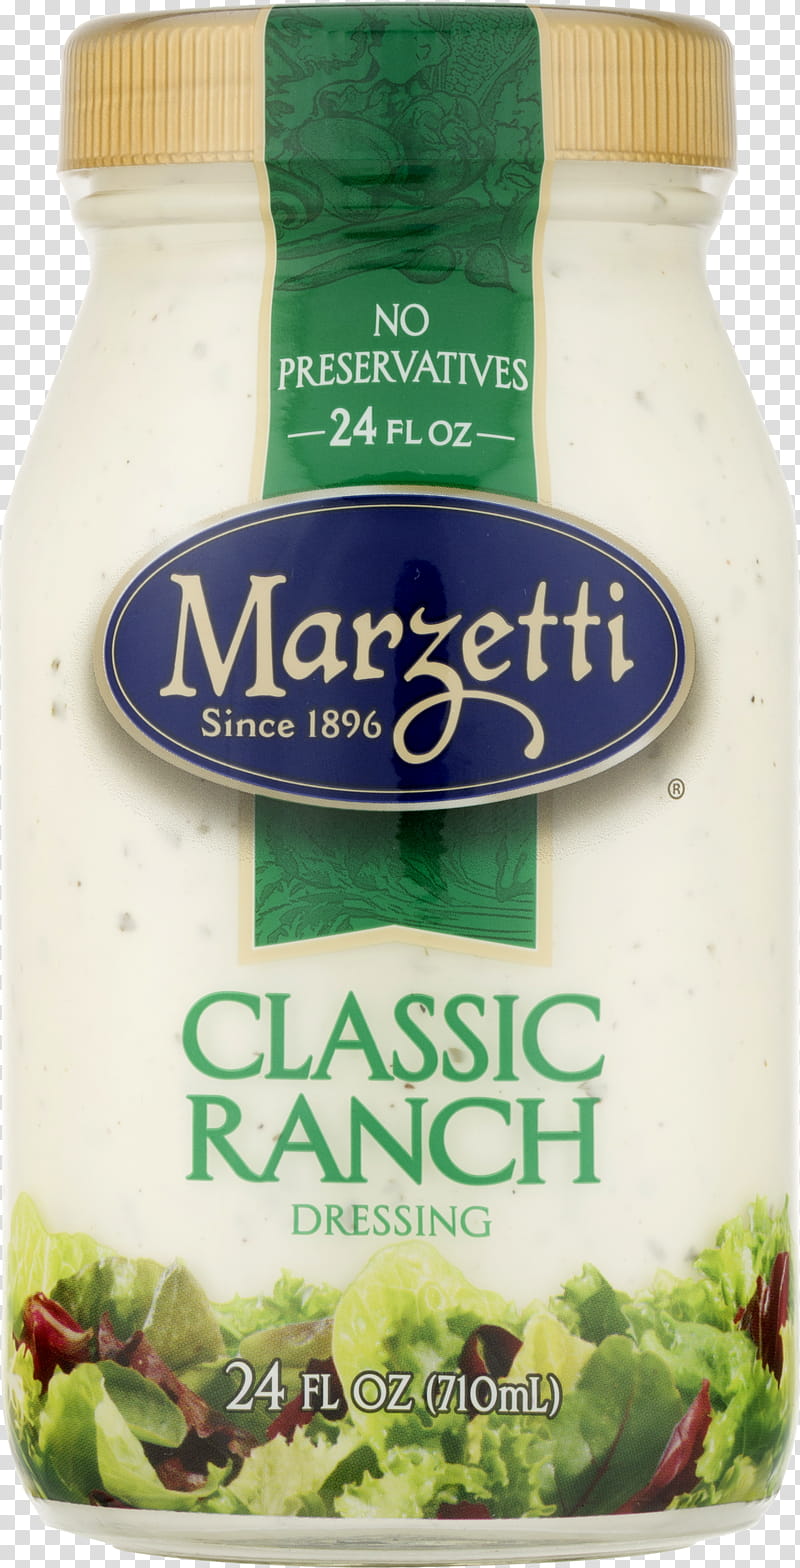 Marzetti Dressing Poppyseed Condiment, Herb, Fluid Ounce, Ranch Dressing, T Marzetti Company, Food, Flavor, Natural Foods transparent background PNG clipart